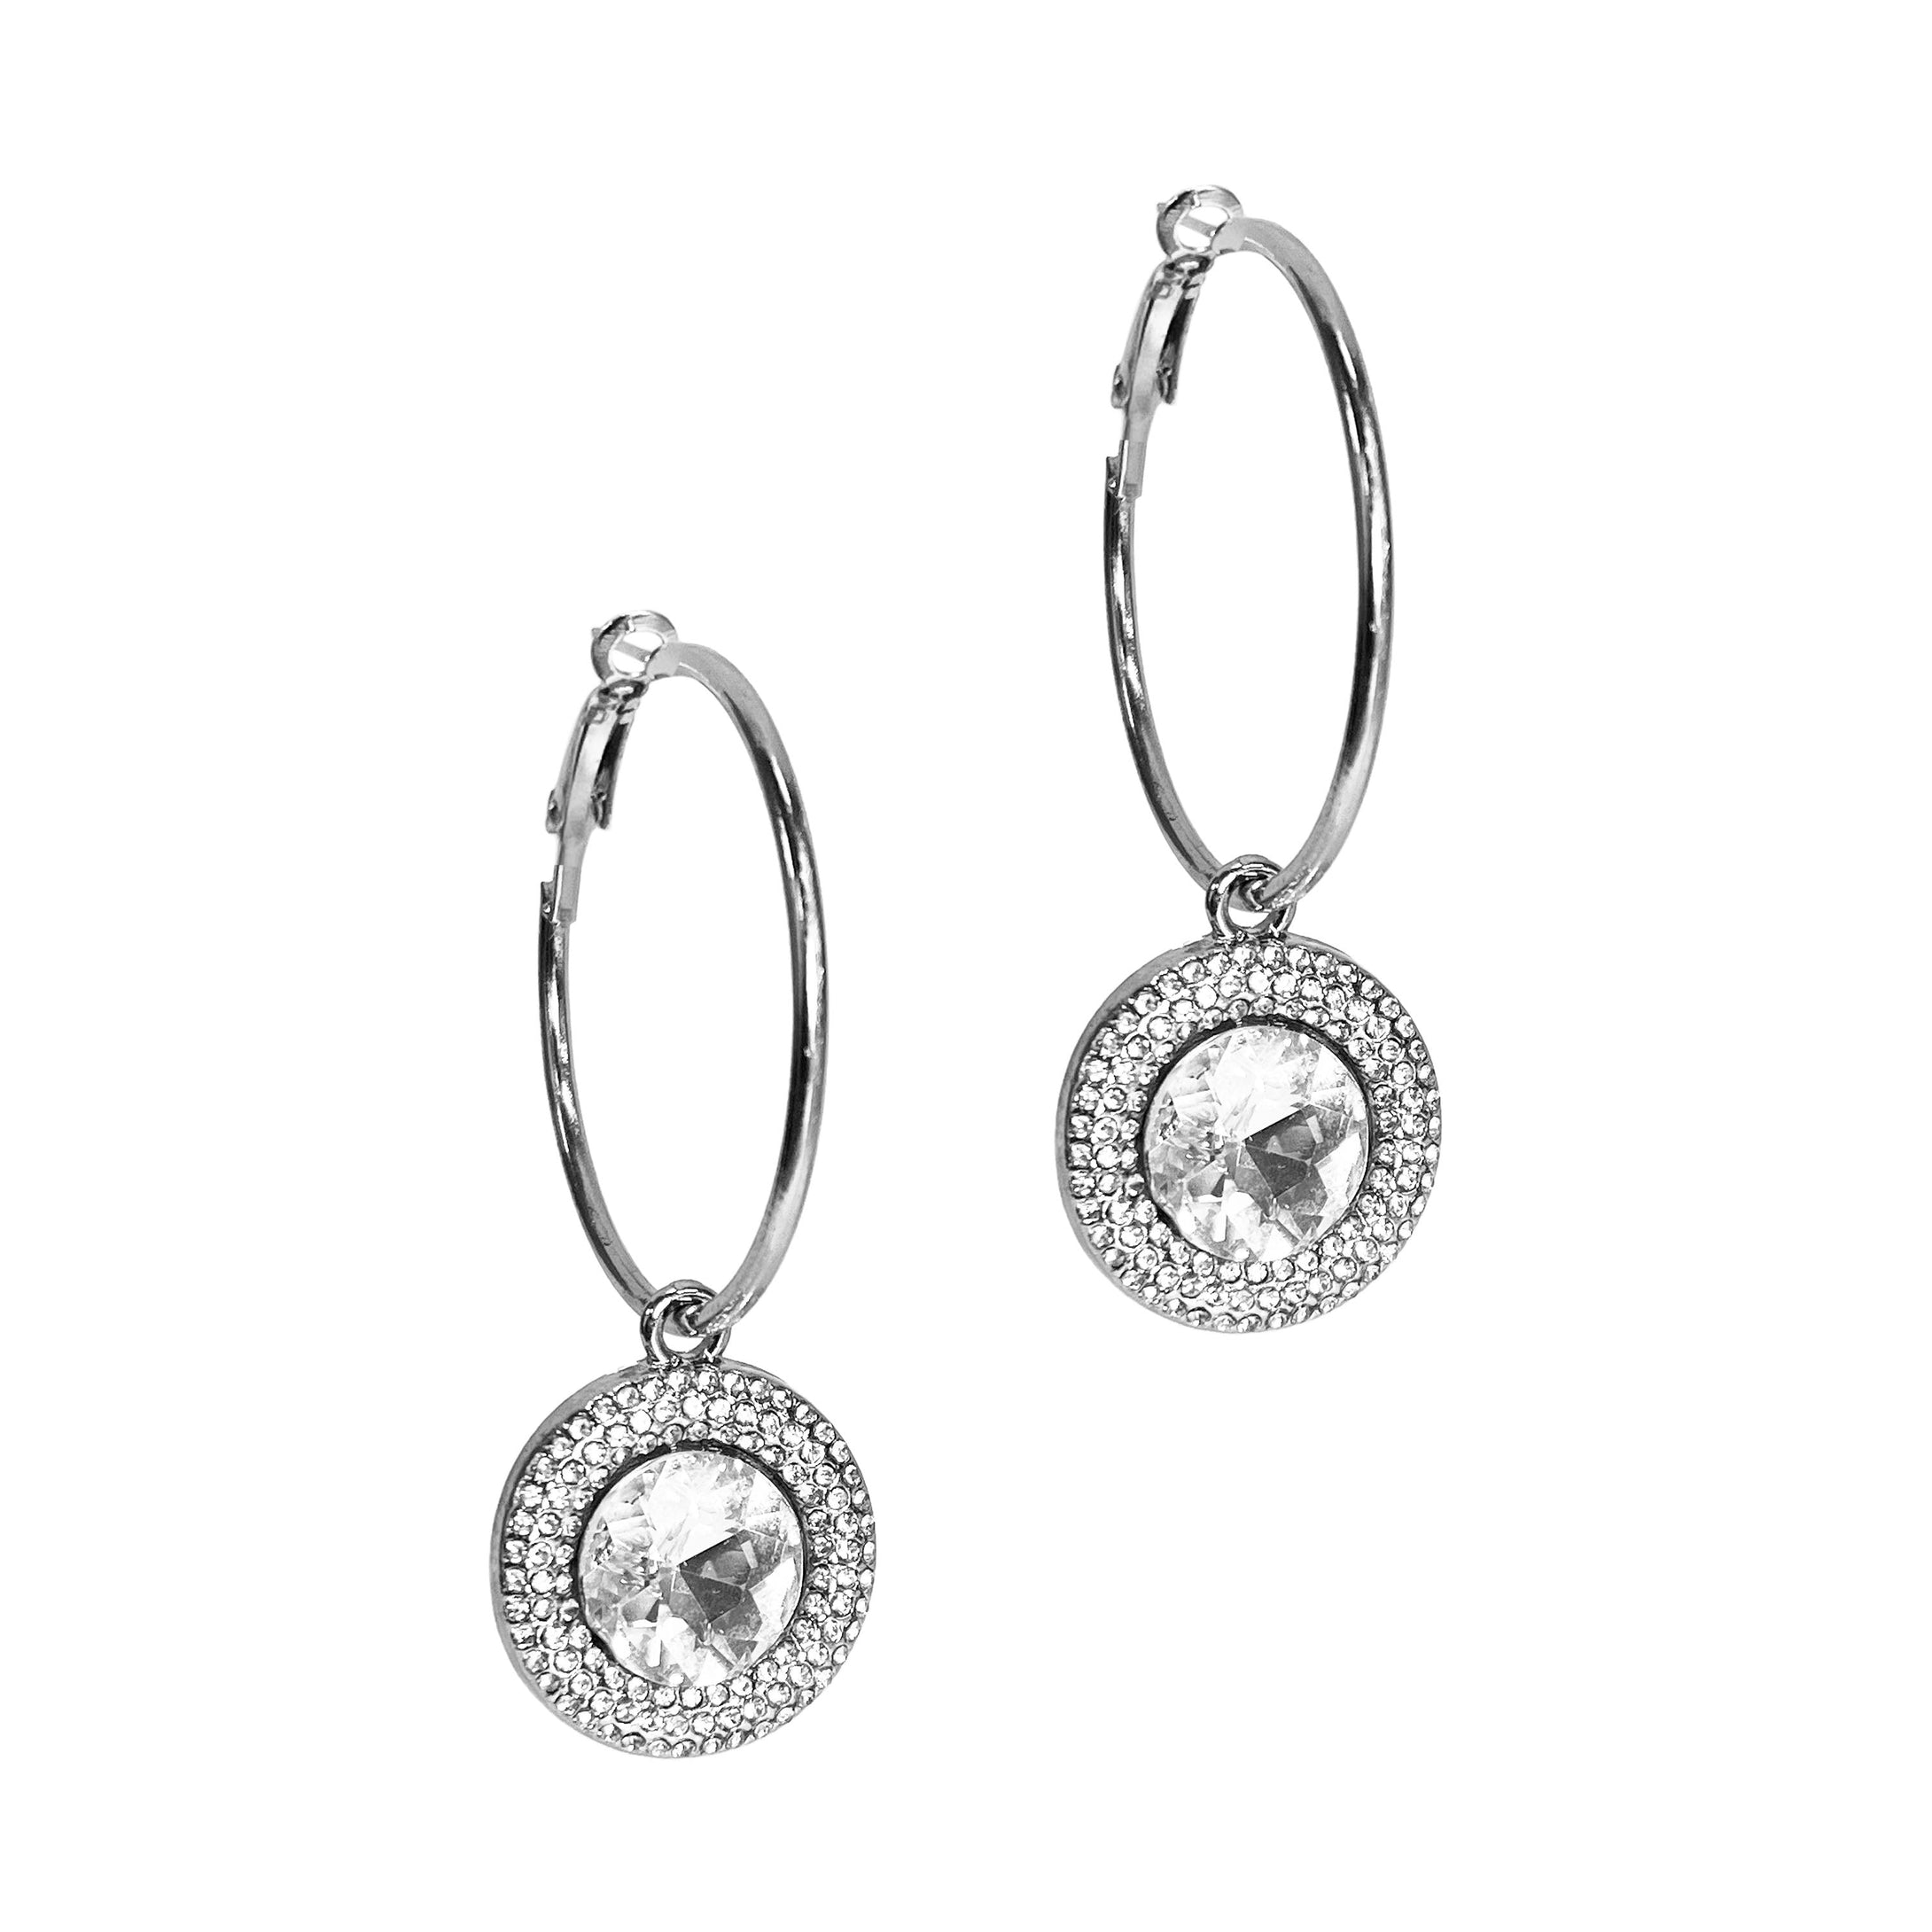 Silver Hoops with Crystal Drop